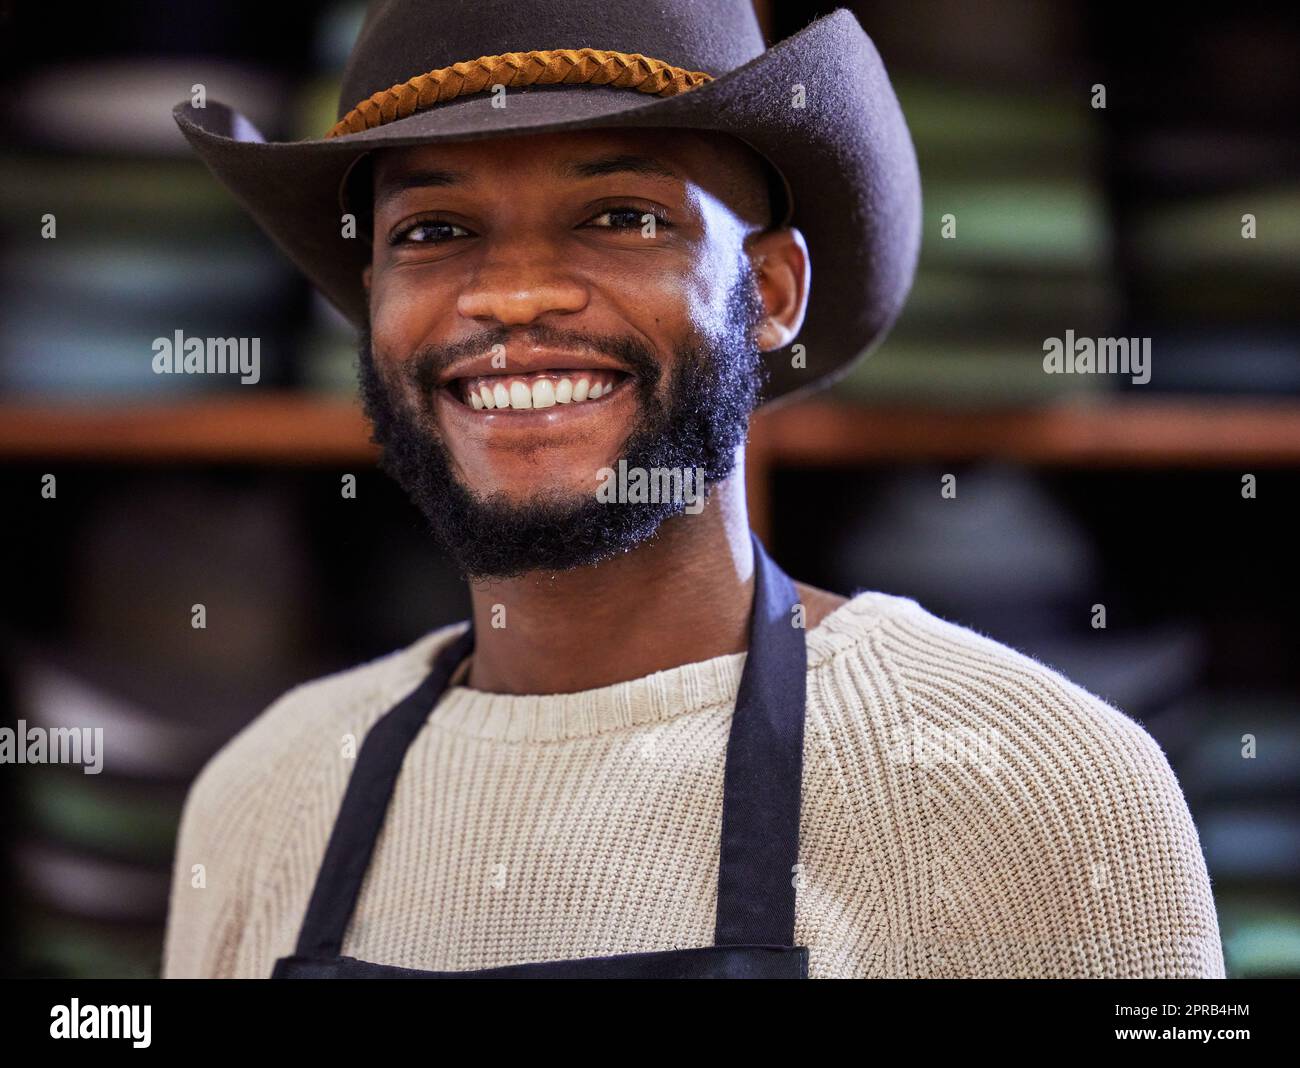 Only the hardworking survive. a young man working at his job in a shop. Stock Photo